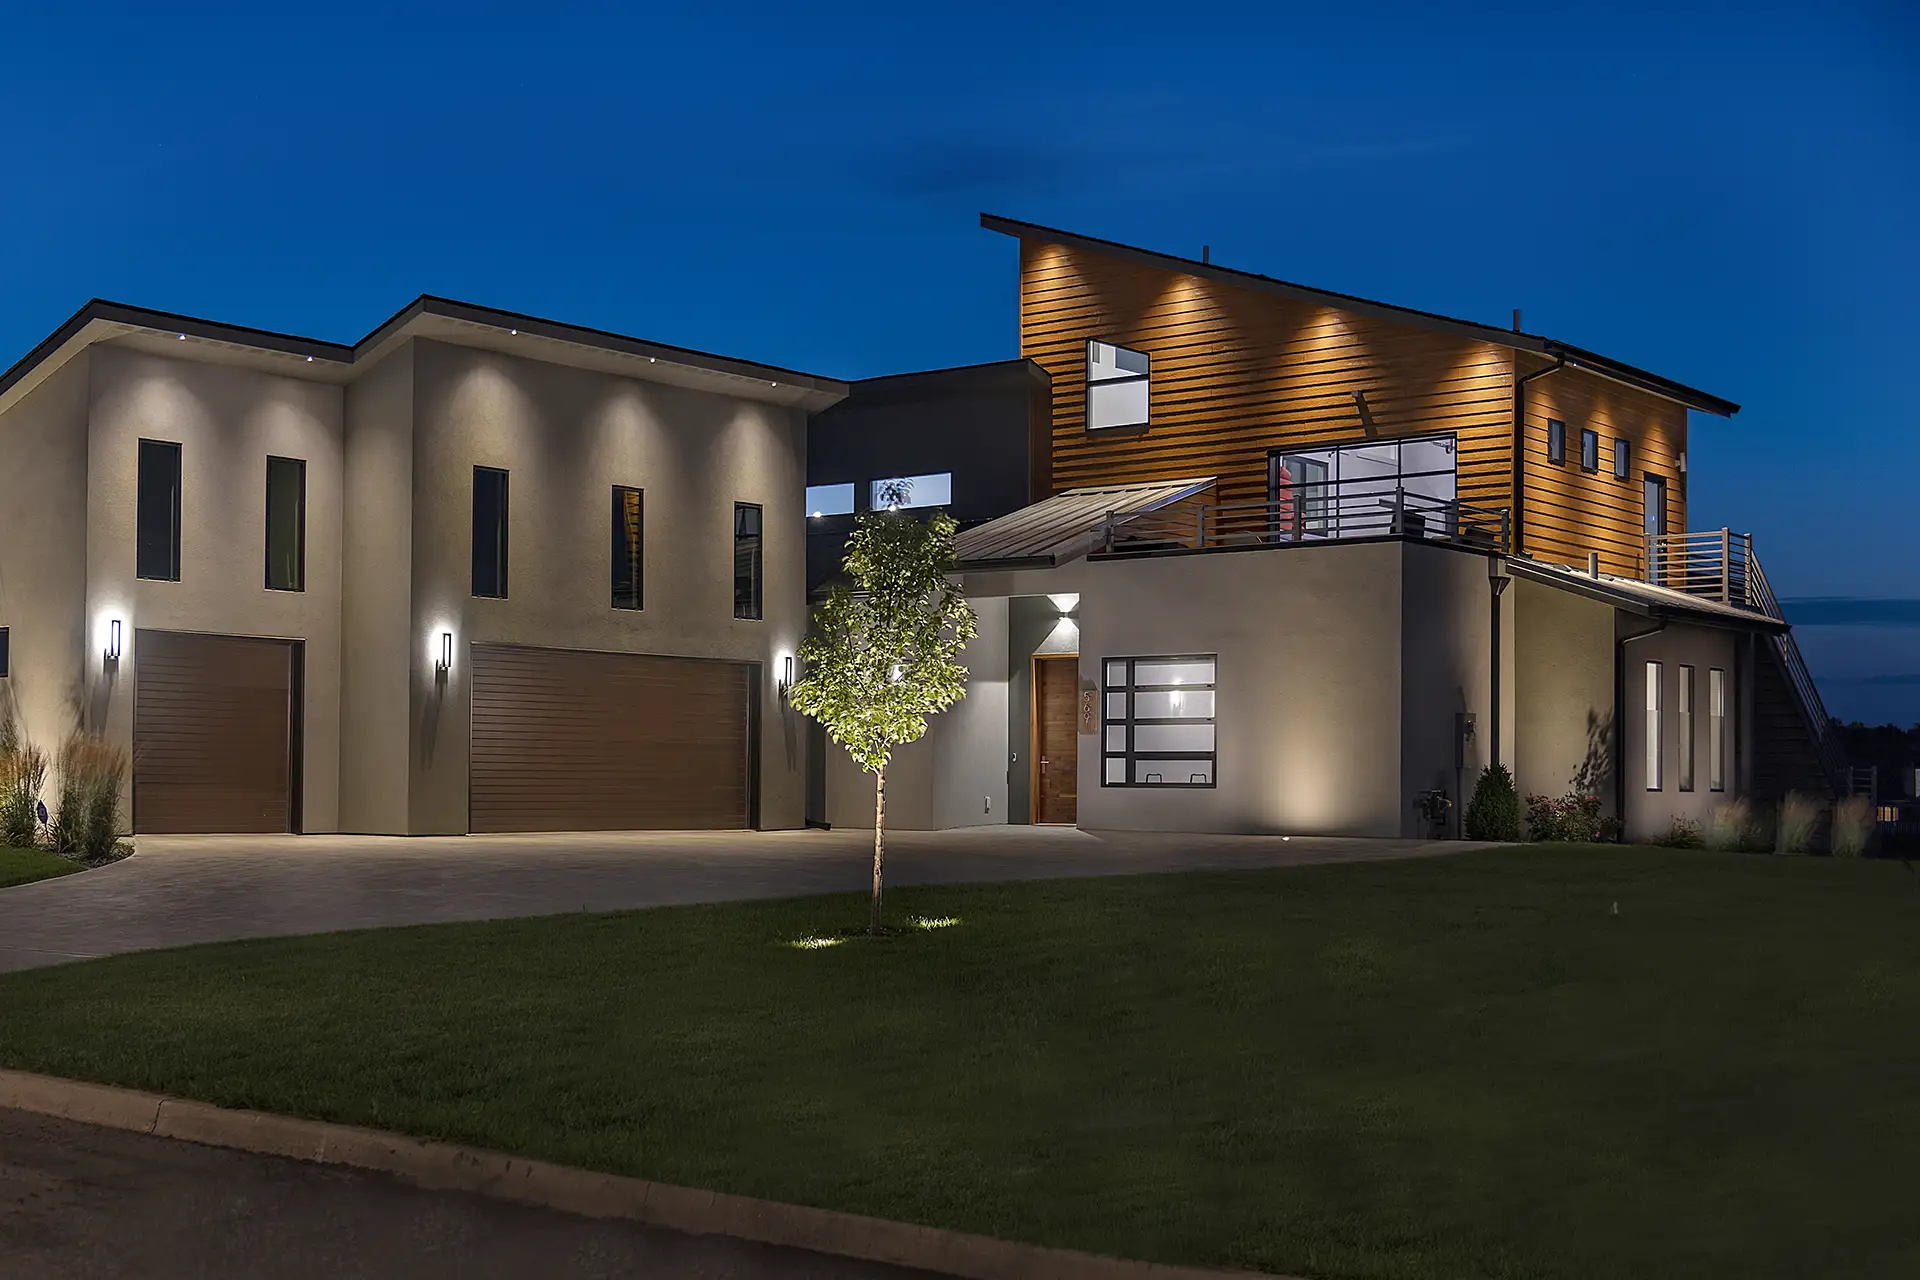 McKarty residence image 1 front view of house Lighthouse Outdoor Lighting and Audio Des Moines IA Iowa